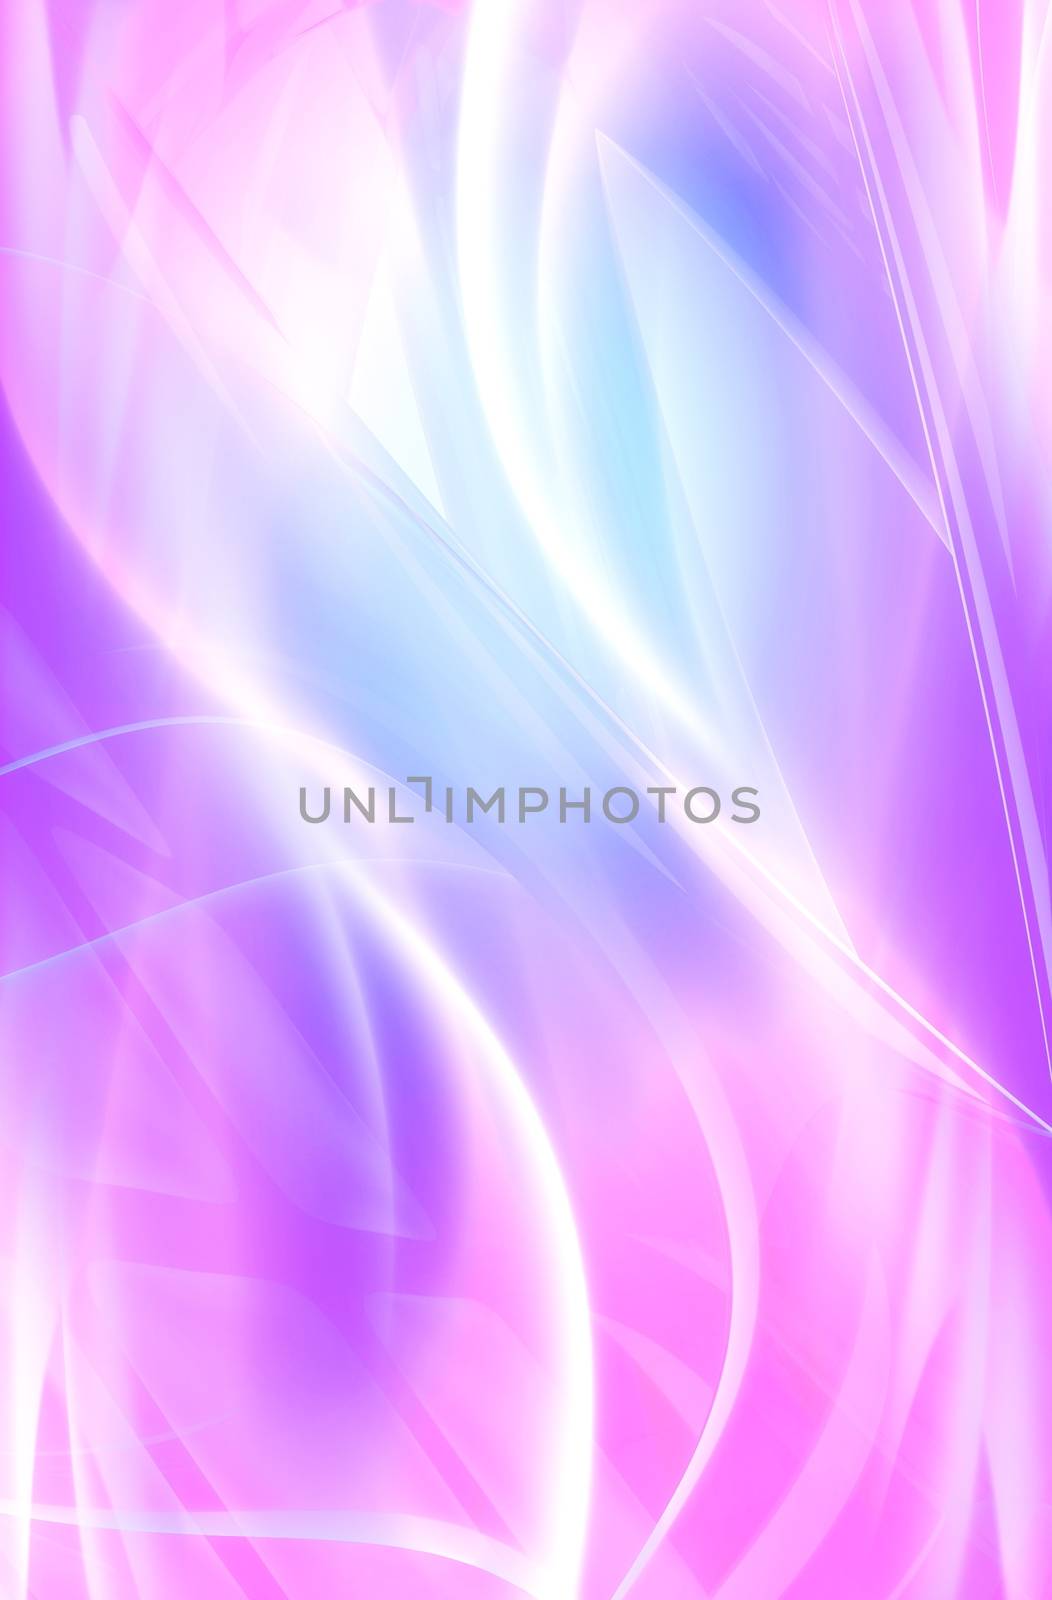 Sexy Pinky Mists Background. Cool Vertical Pinky-Violet Misty Background. Great for Female Related Artworks. Smooth Sexy Elegant Pinky Background.